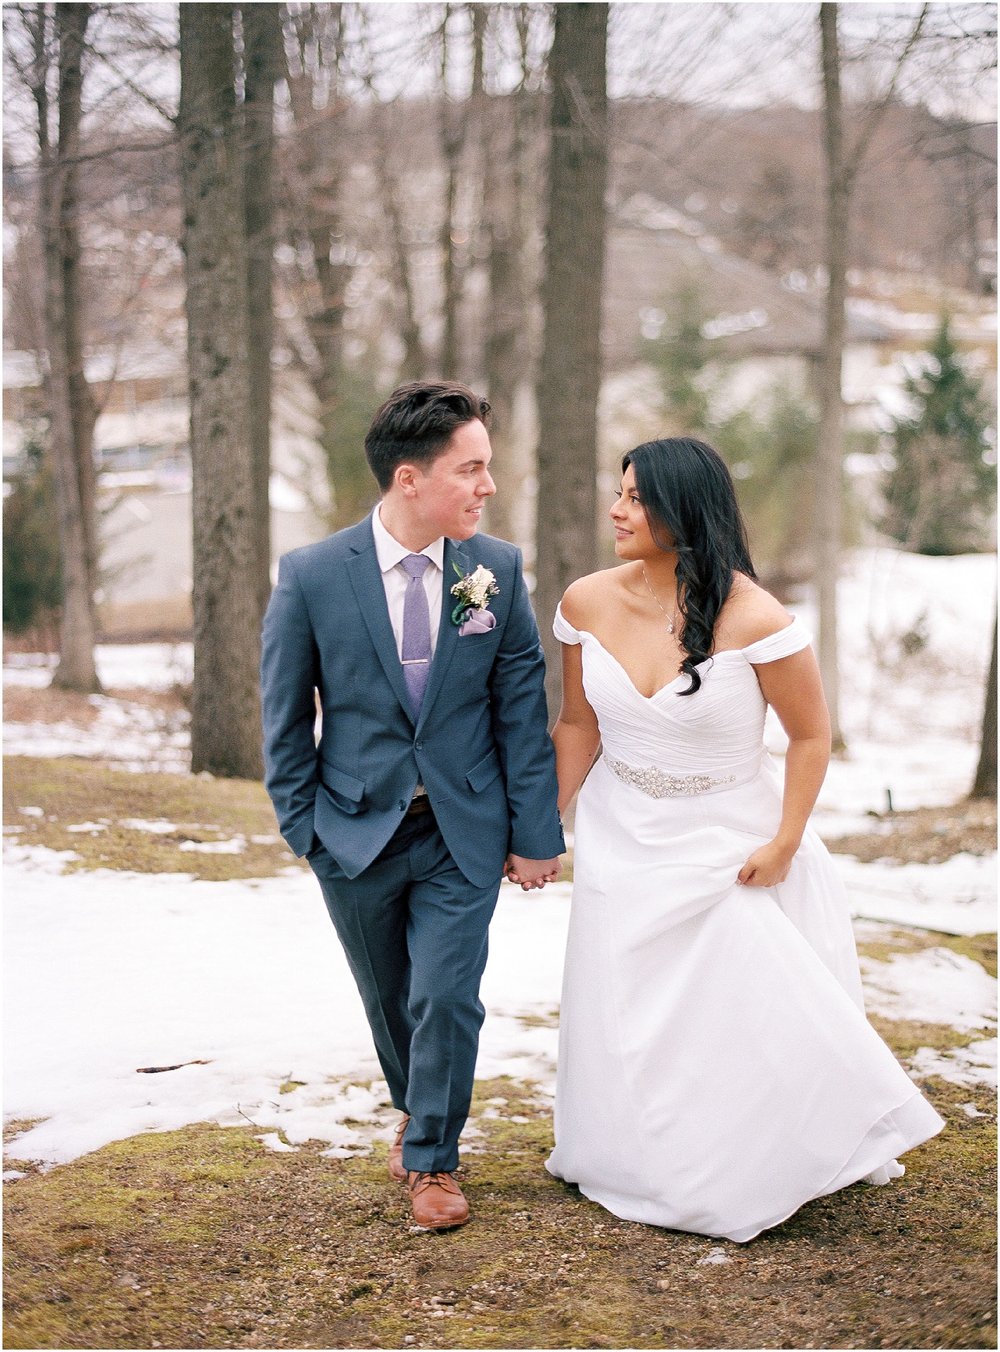 bride and groom portraits for an intimate wedding in the mountains on northern New Jersey, walking in the woods, shot on photographic film, portra 400, contax camera, elopement 